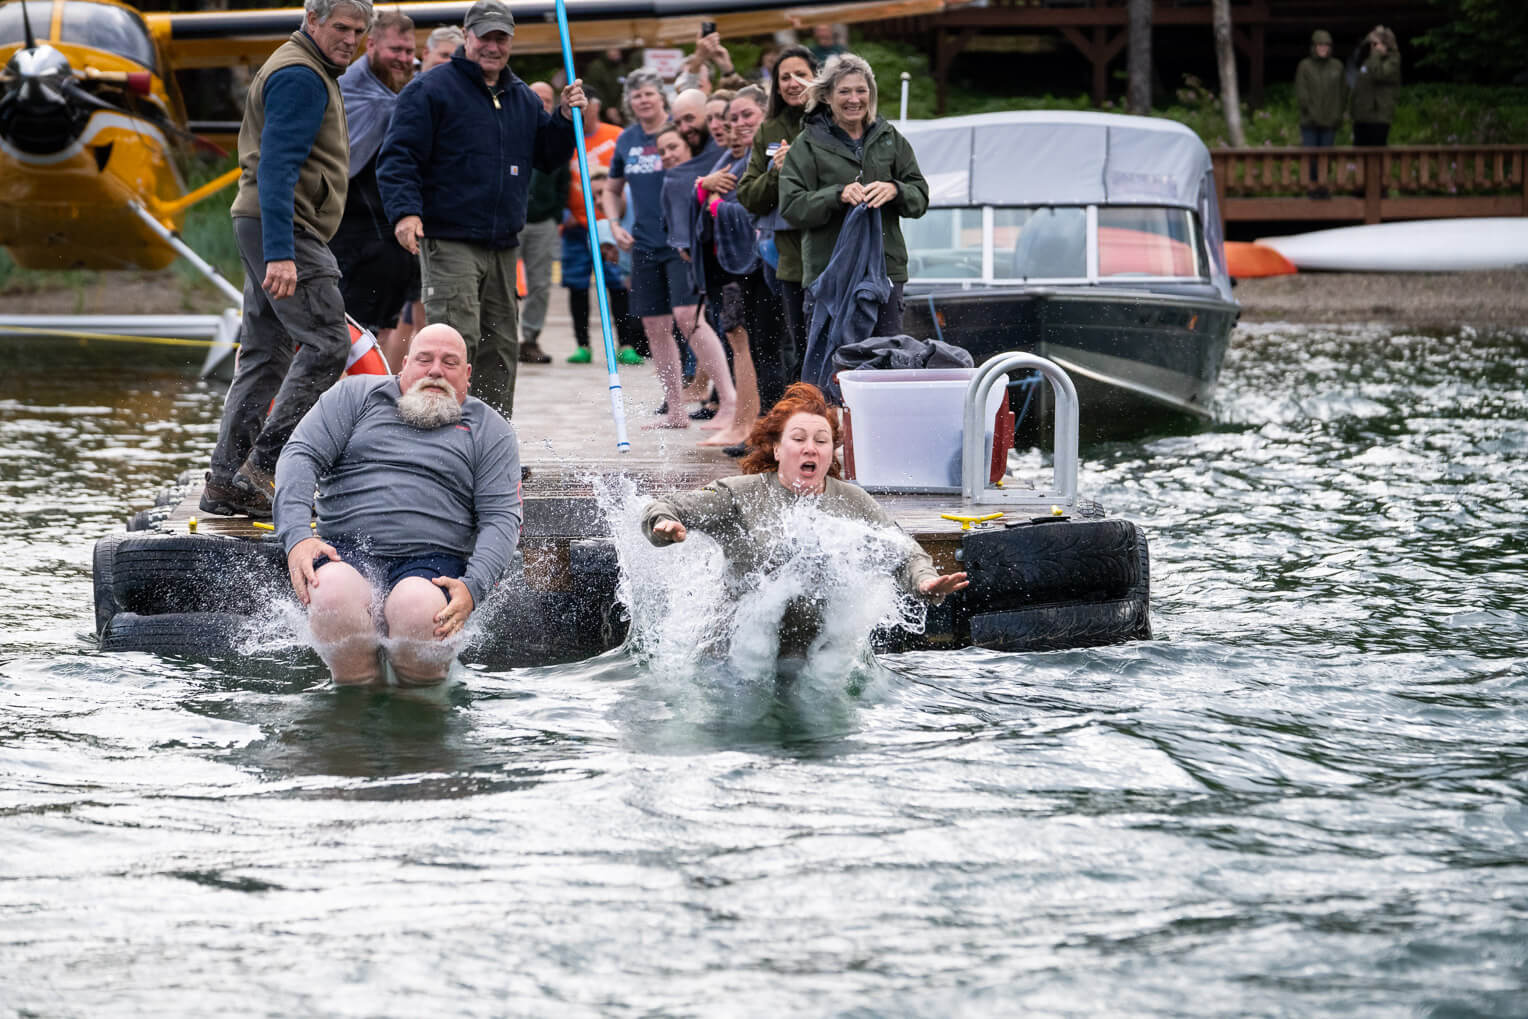 The cold water was also a shock during the Wednesday night Polar Plunge.